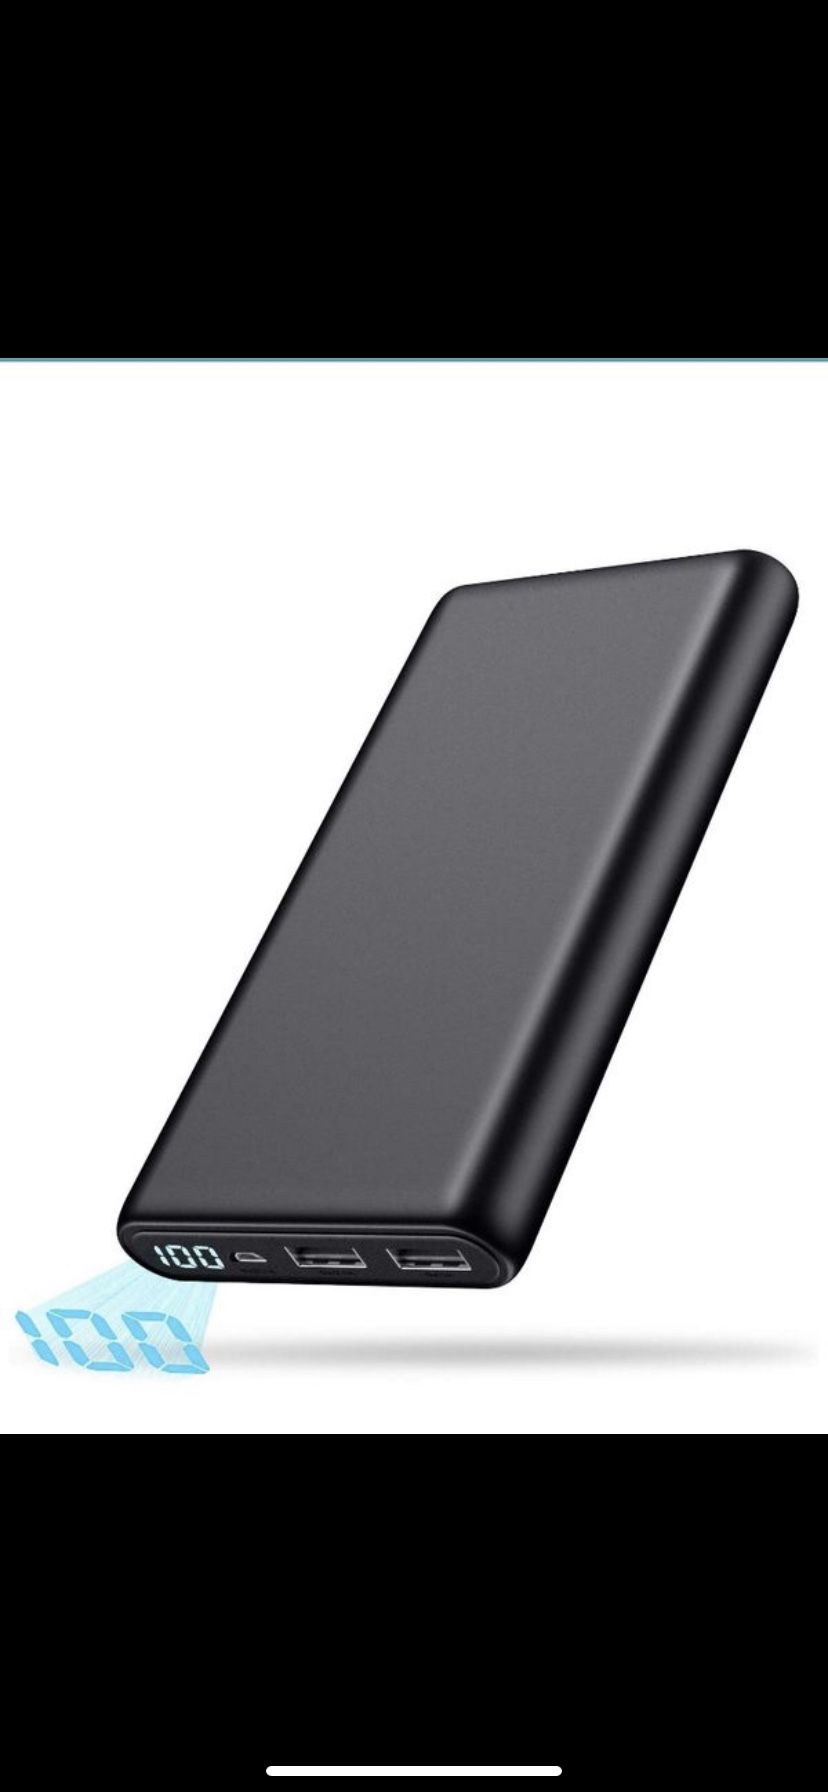 Portable Charger Power Bank 24800mAh High Capacity External Battery Pack Dual Output Port with LCD Digital Display Portable Phone Charger for Smart P